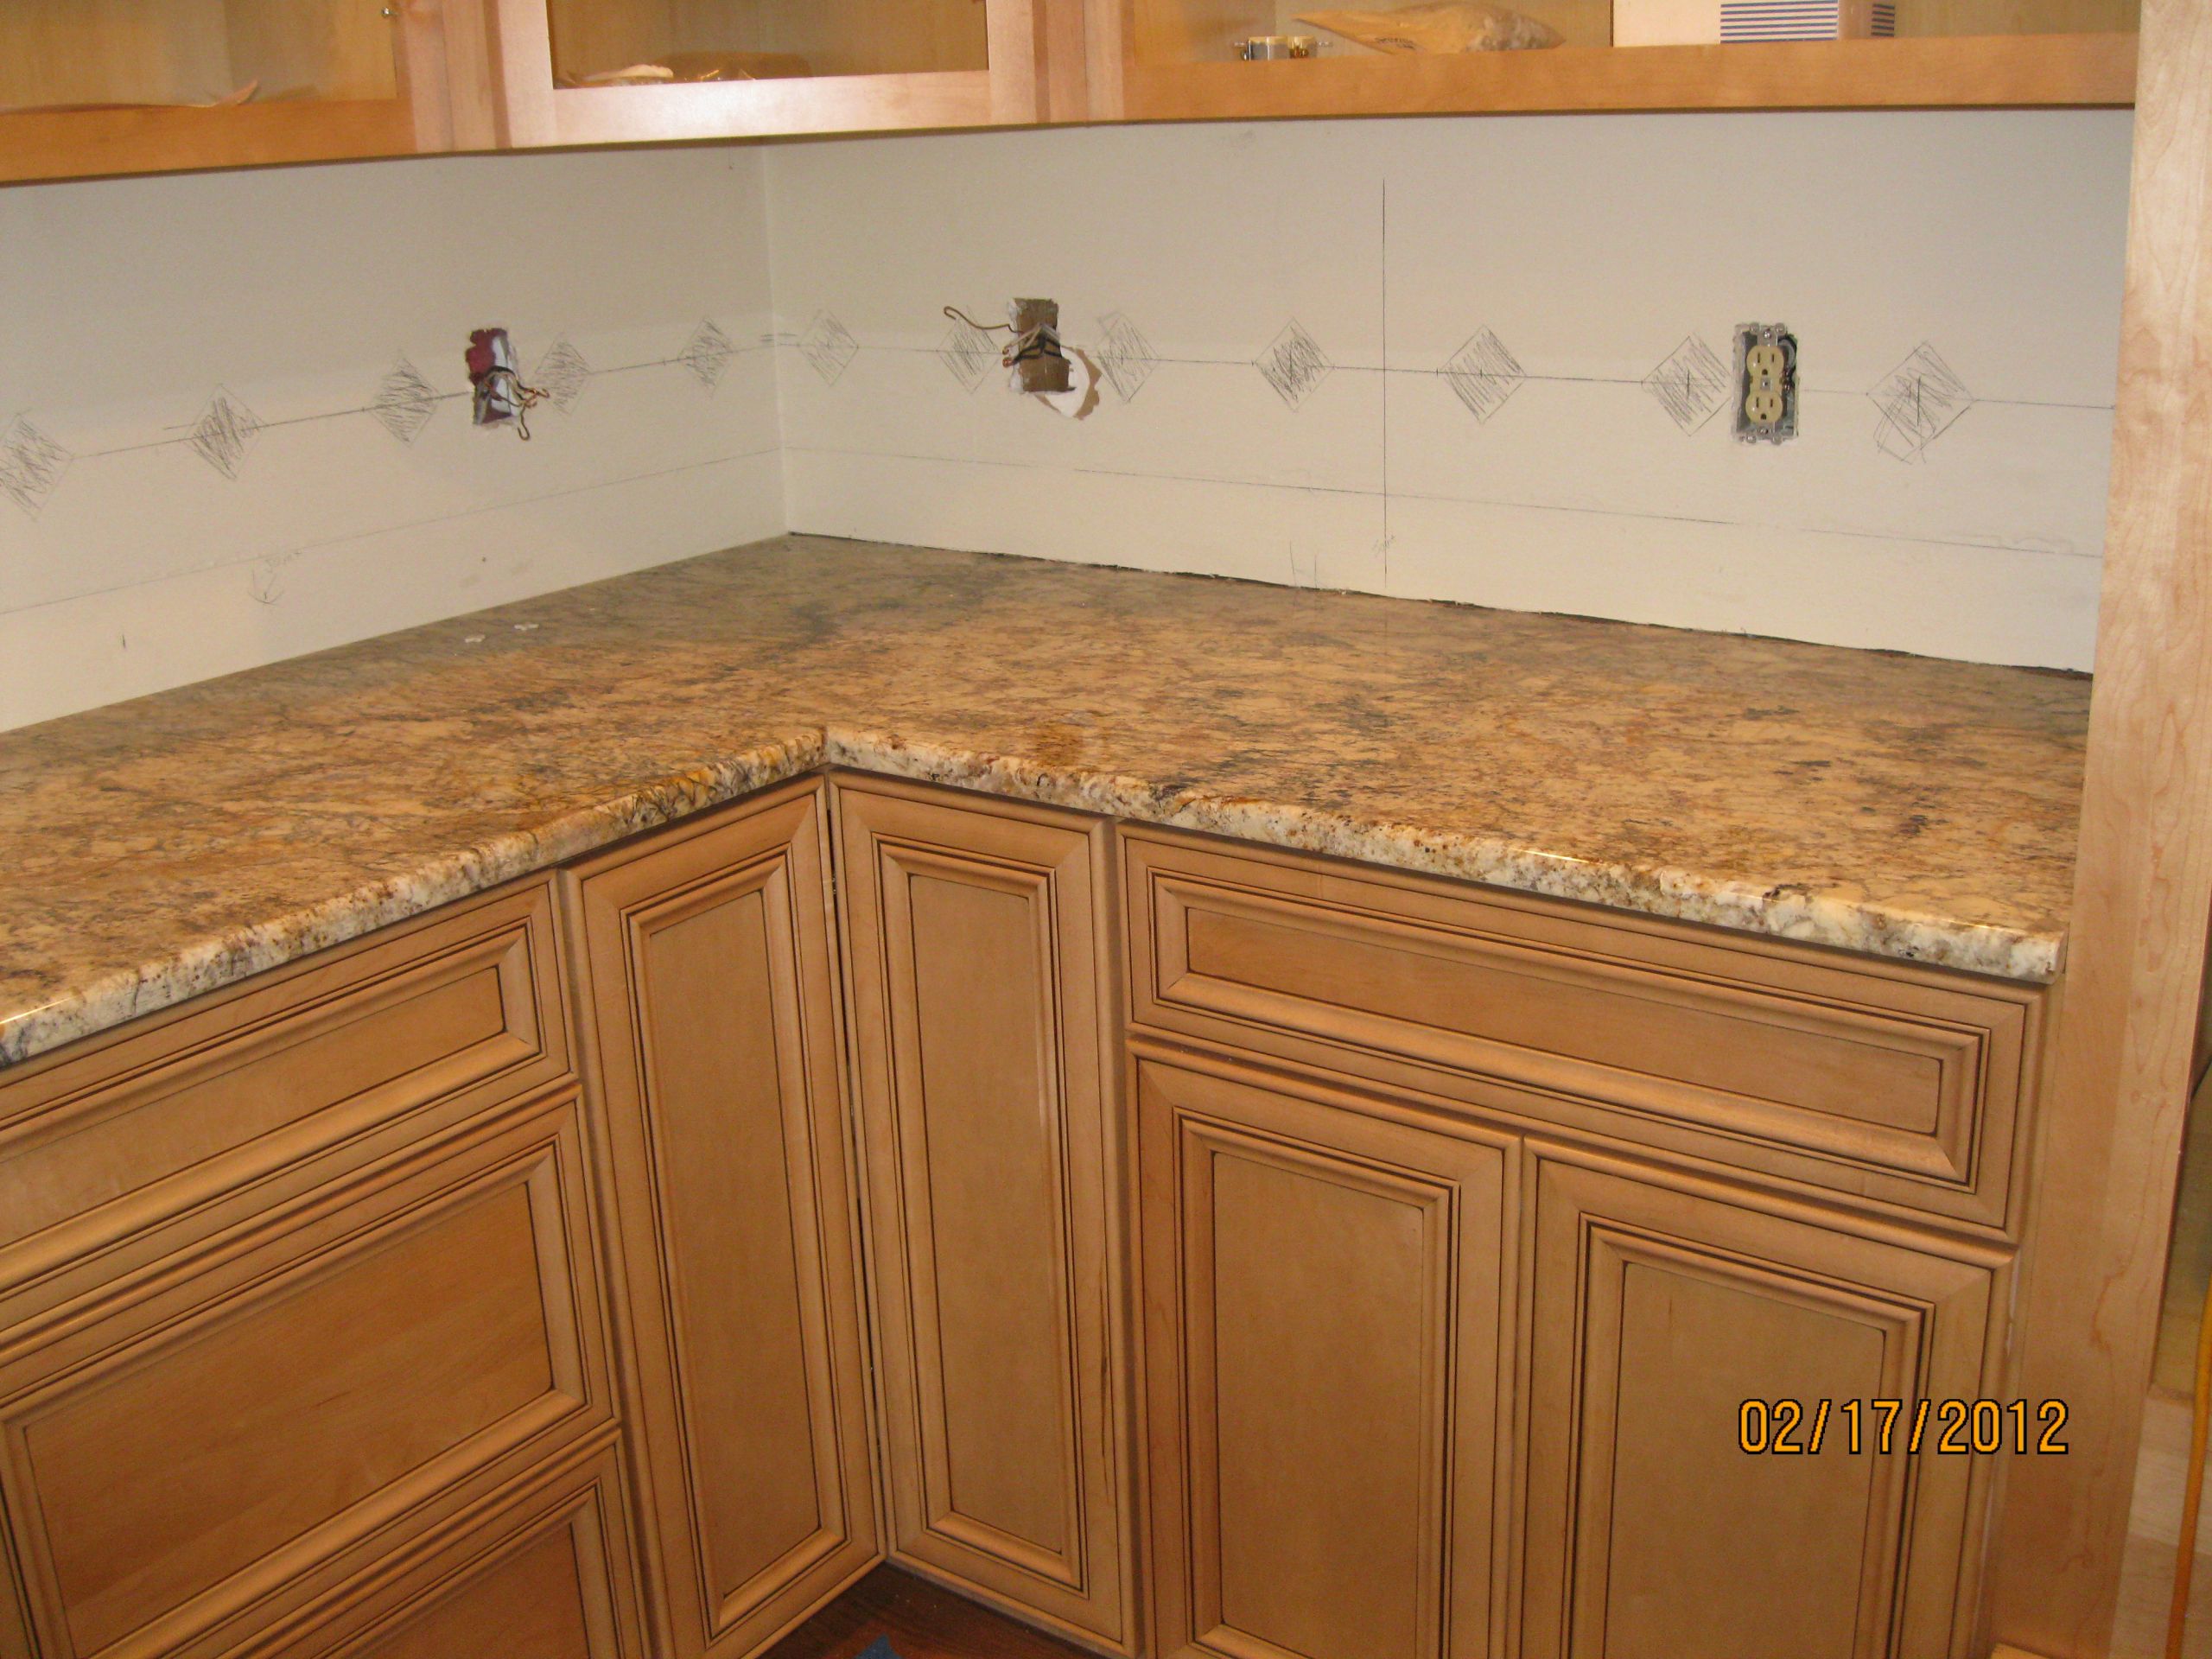 Kitchen Countertops Outlets
 West Chester Kitchen – Countertops